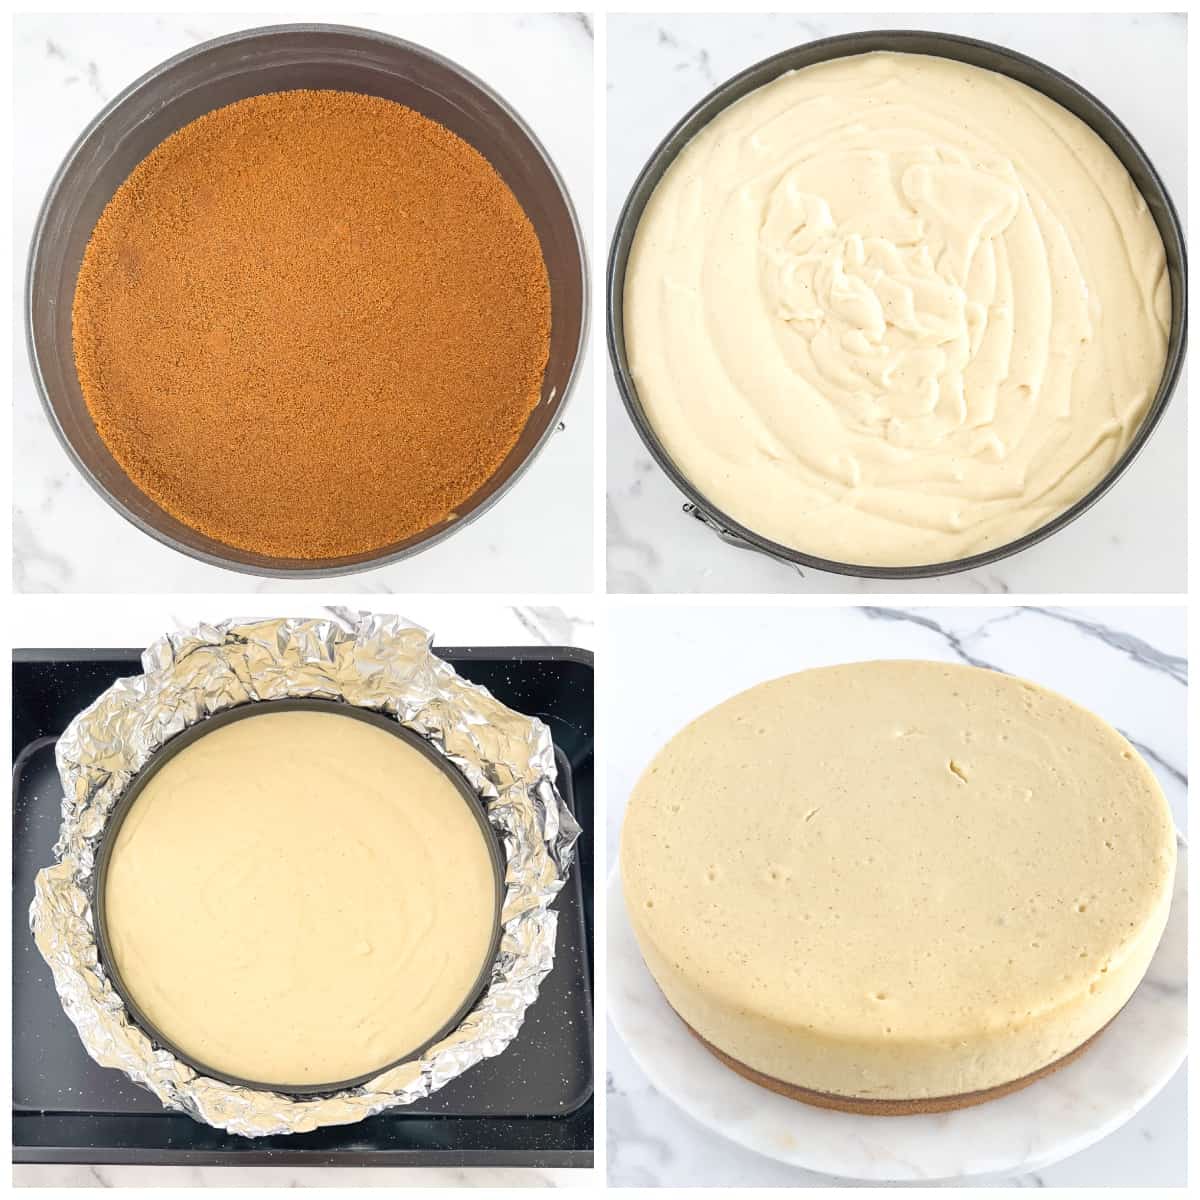 Once the cheesecake is cool, remove it from the oven and allow it to cool completely before adding the whipped cream topping.